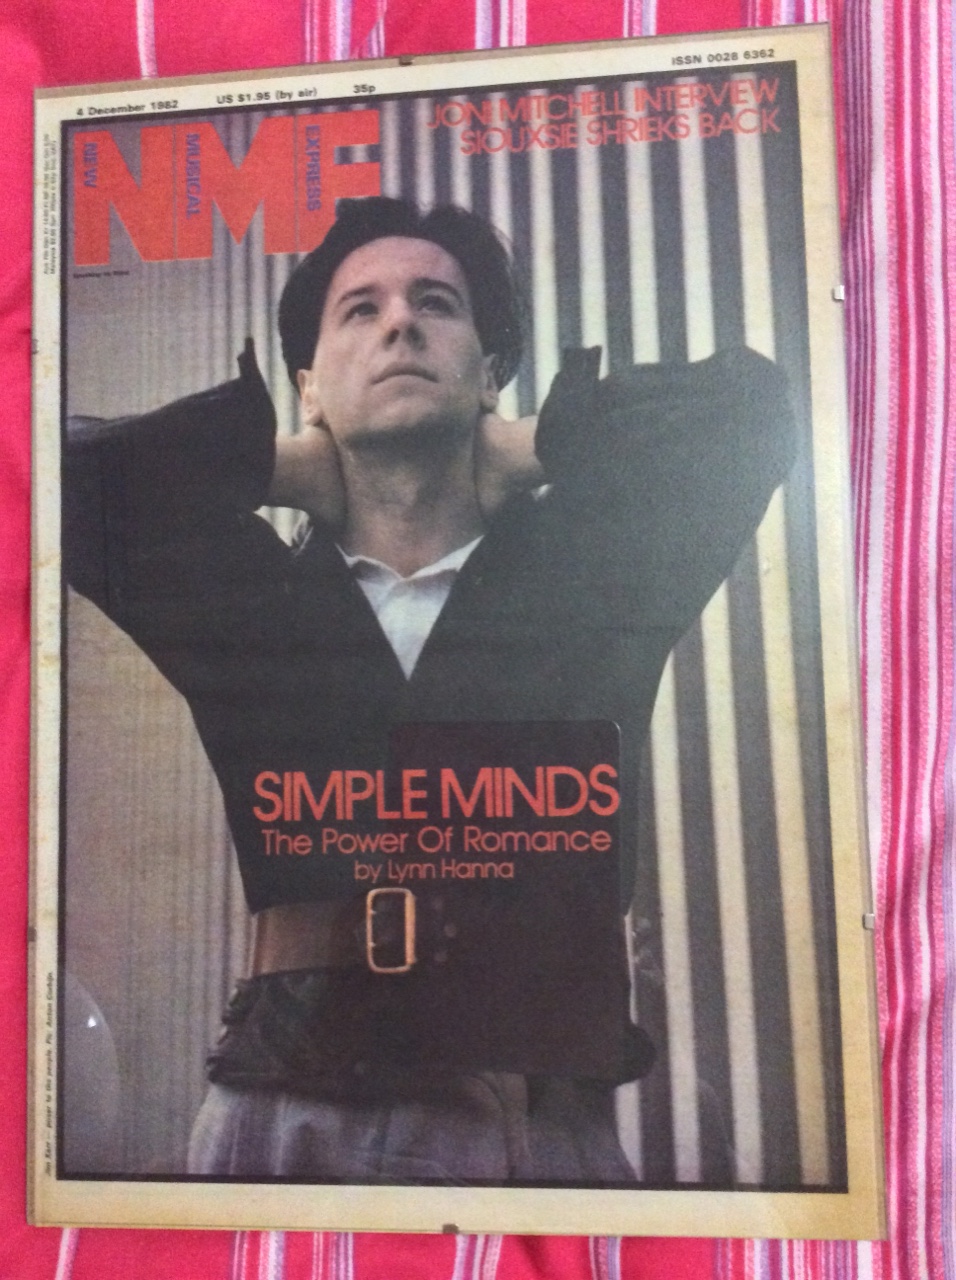 Jim on the cover of NME – DEc 1982. It has arrived!